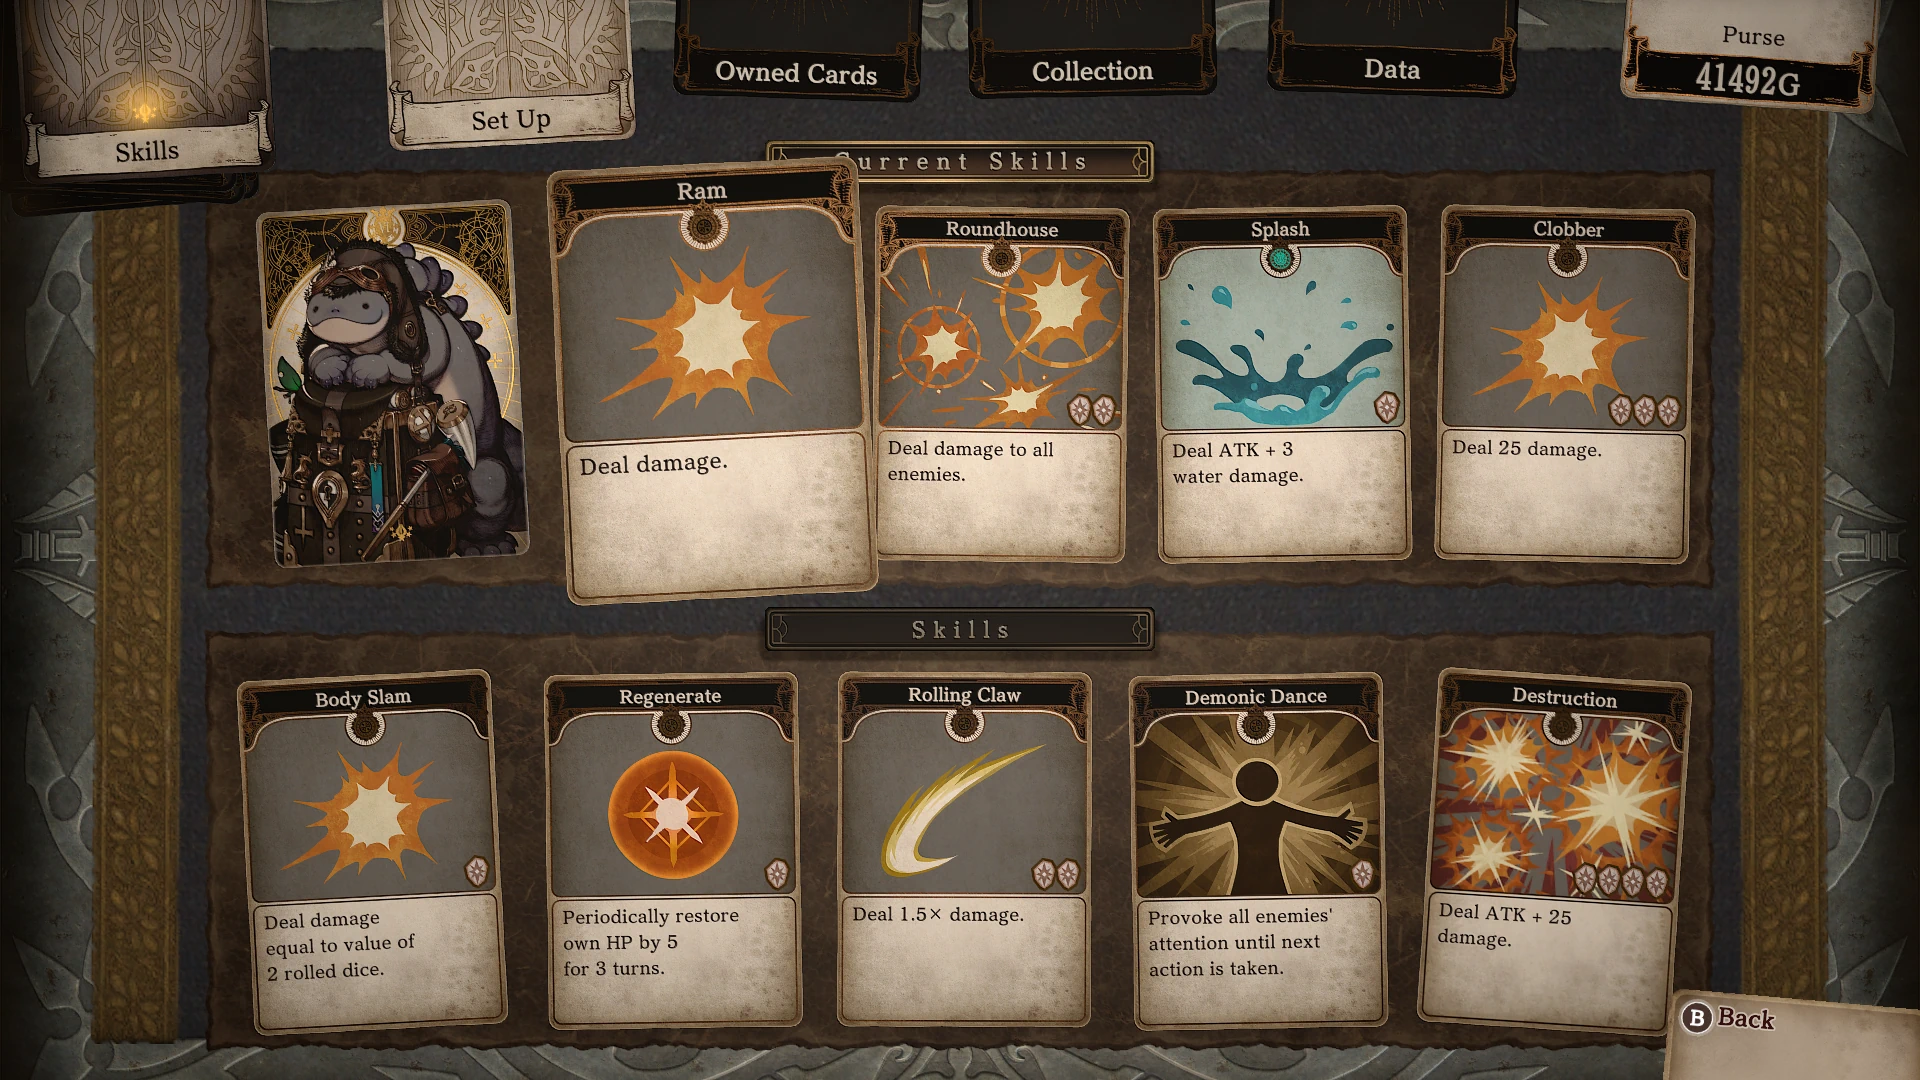 An image of Mar's skill selection screen